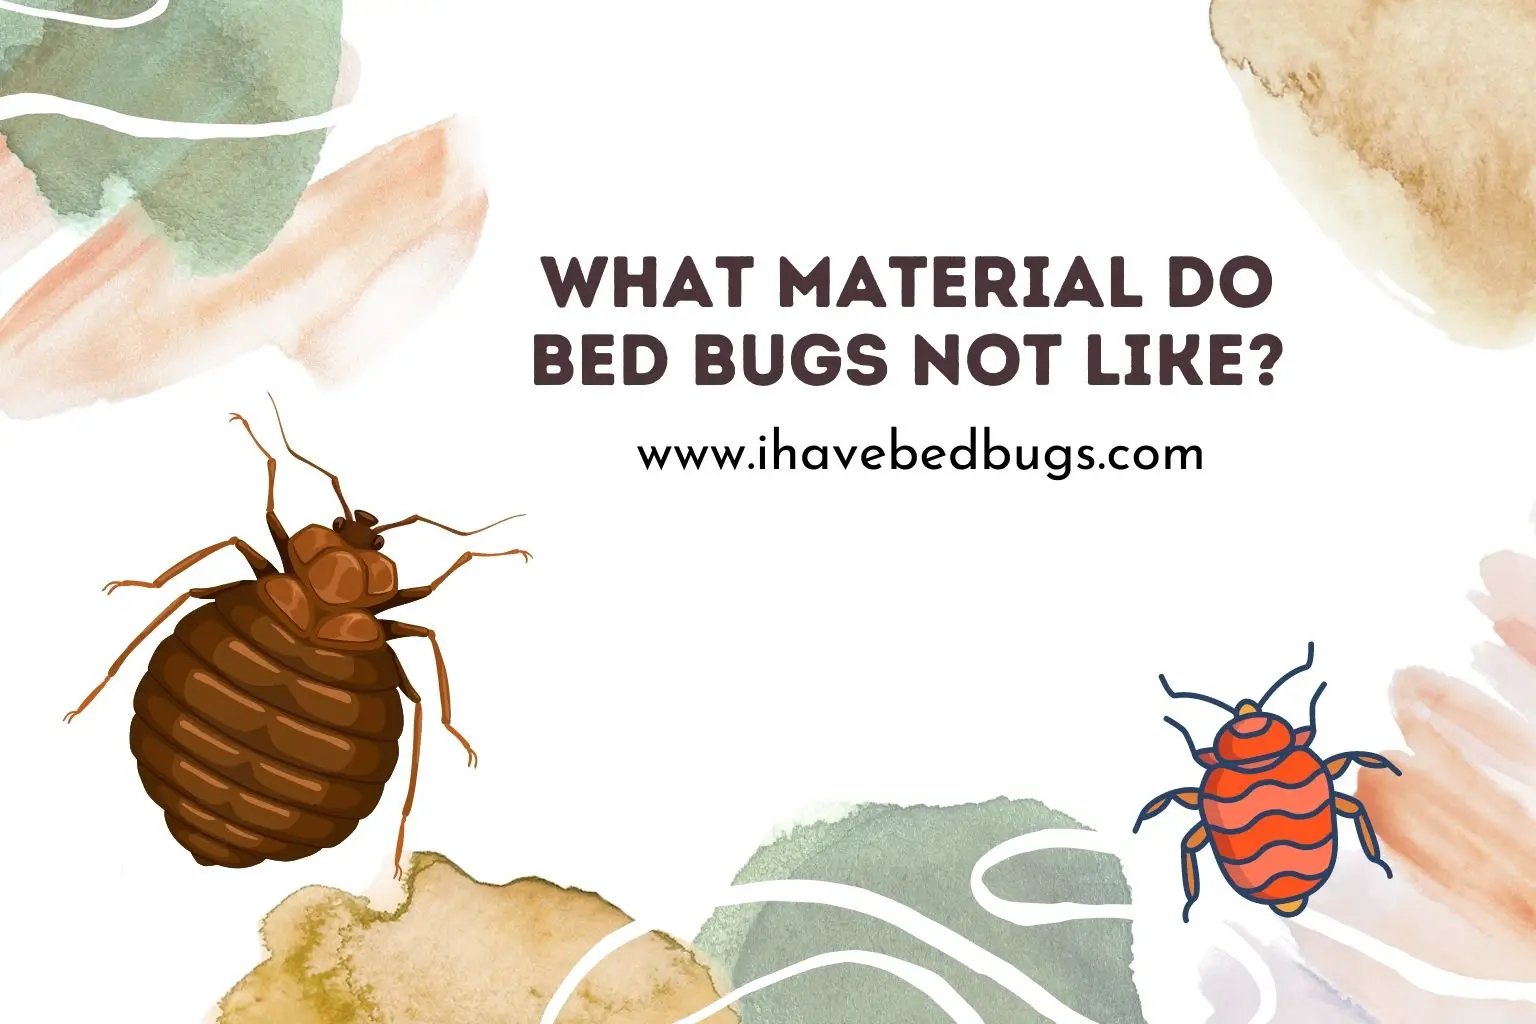 What material do bed bugs not like